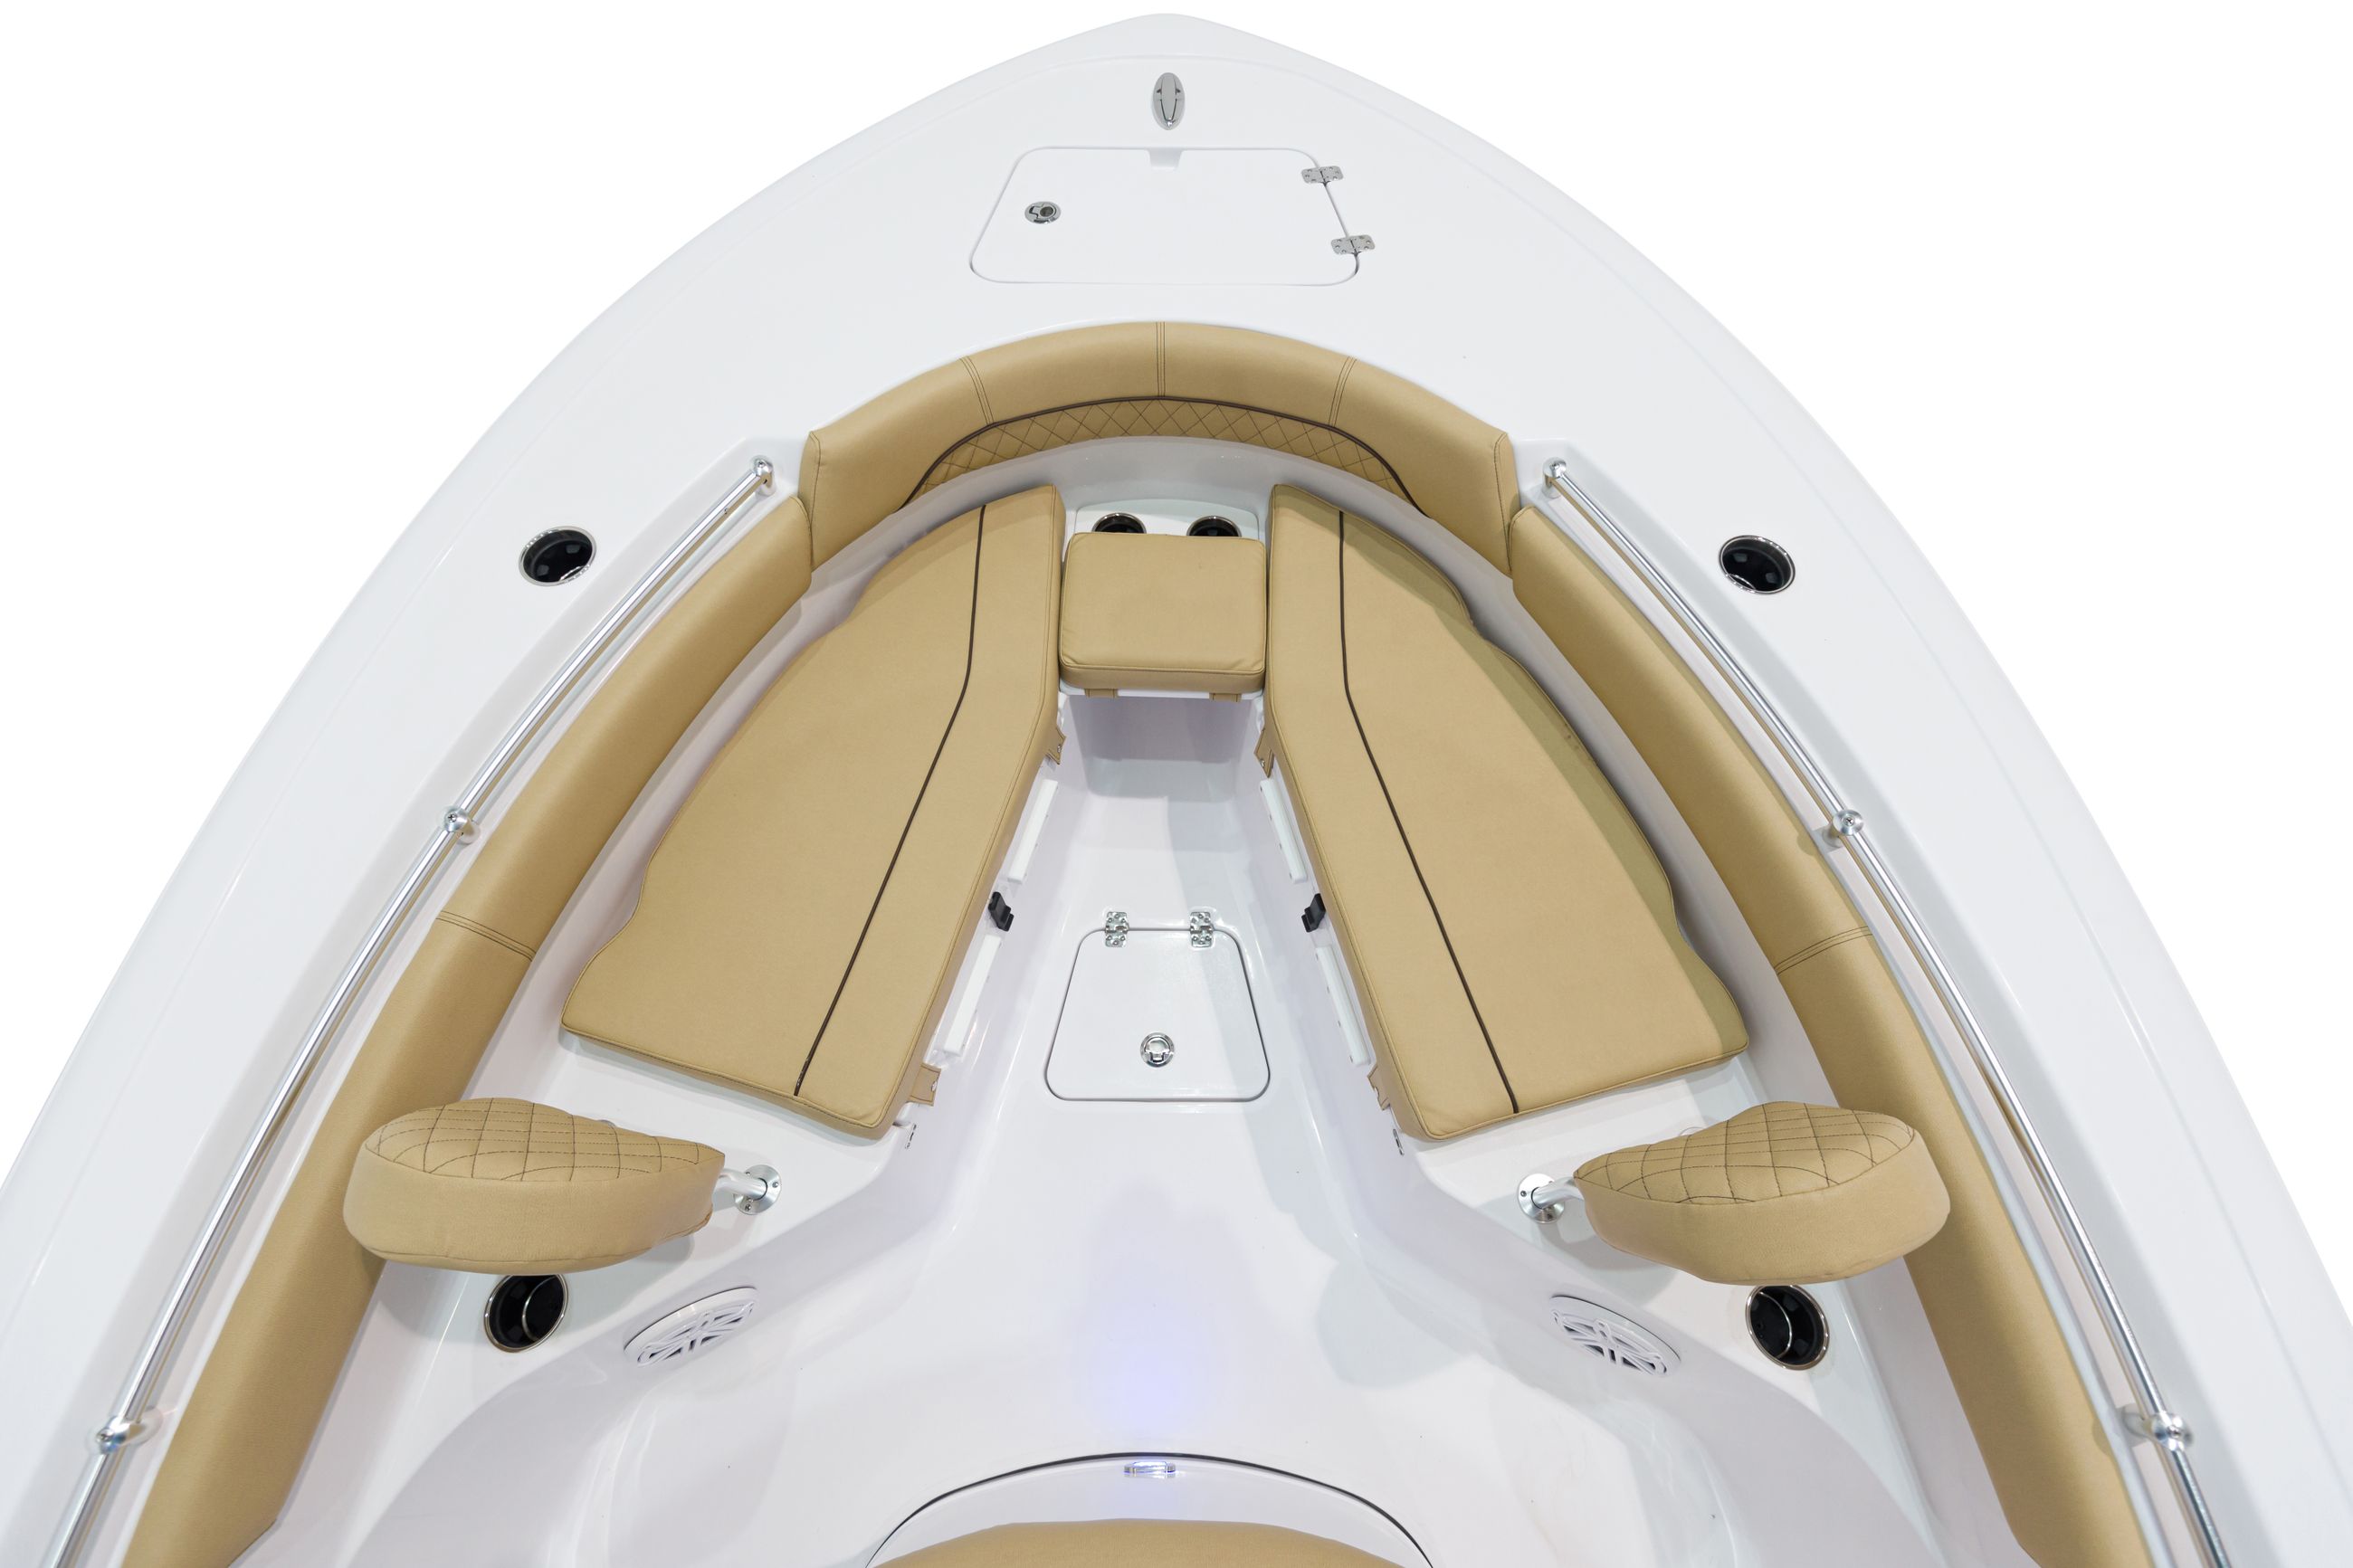 Detail image of Comfortable Bow Layout